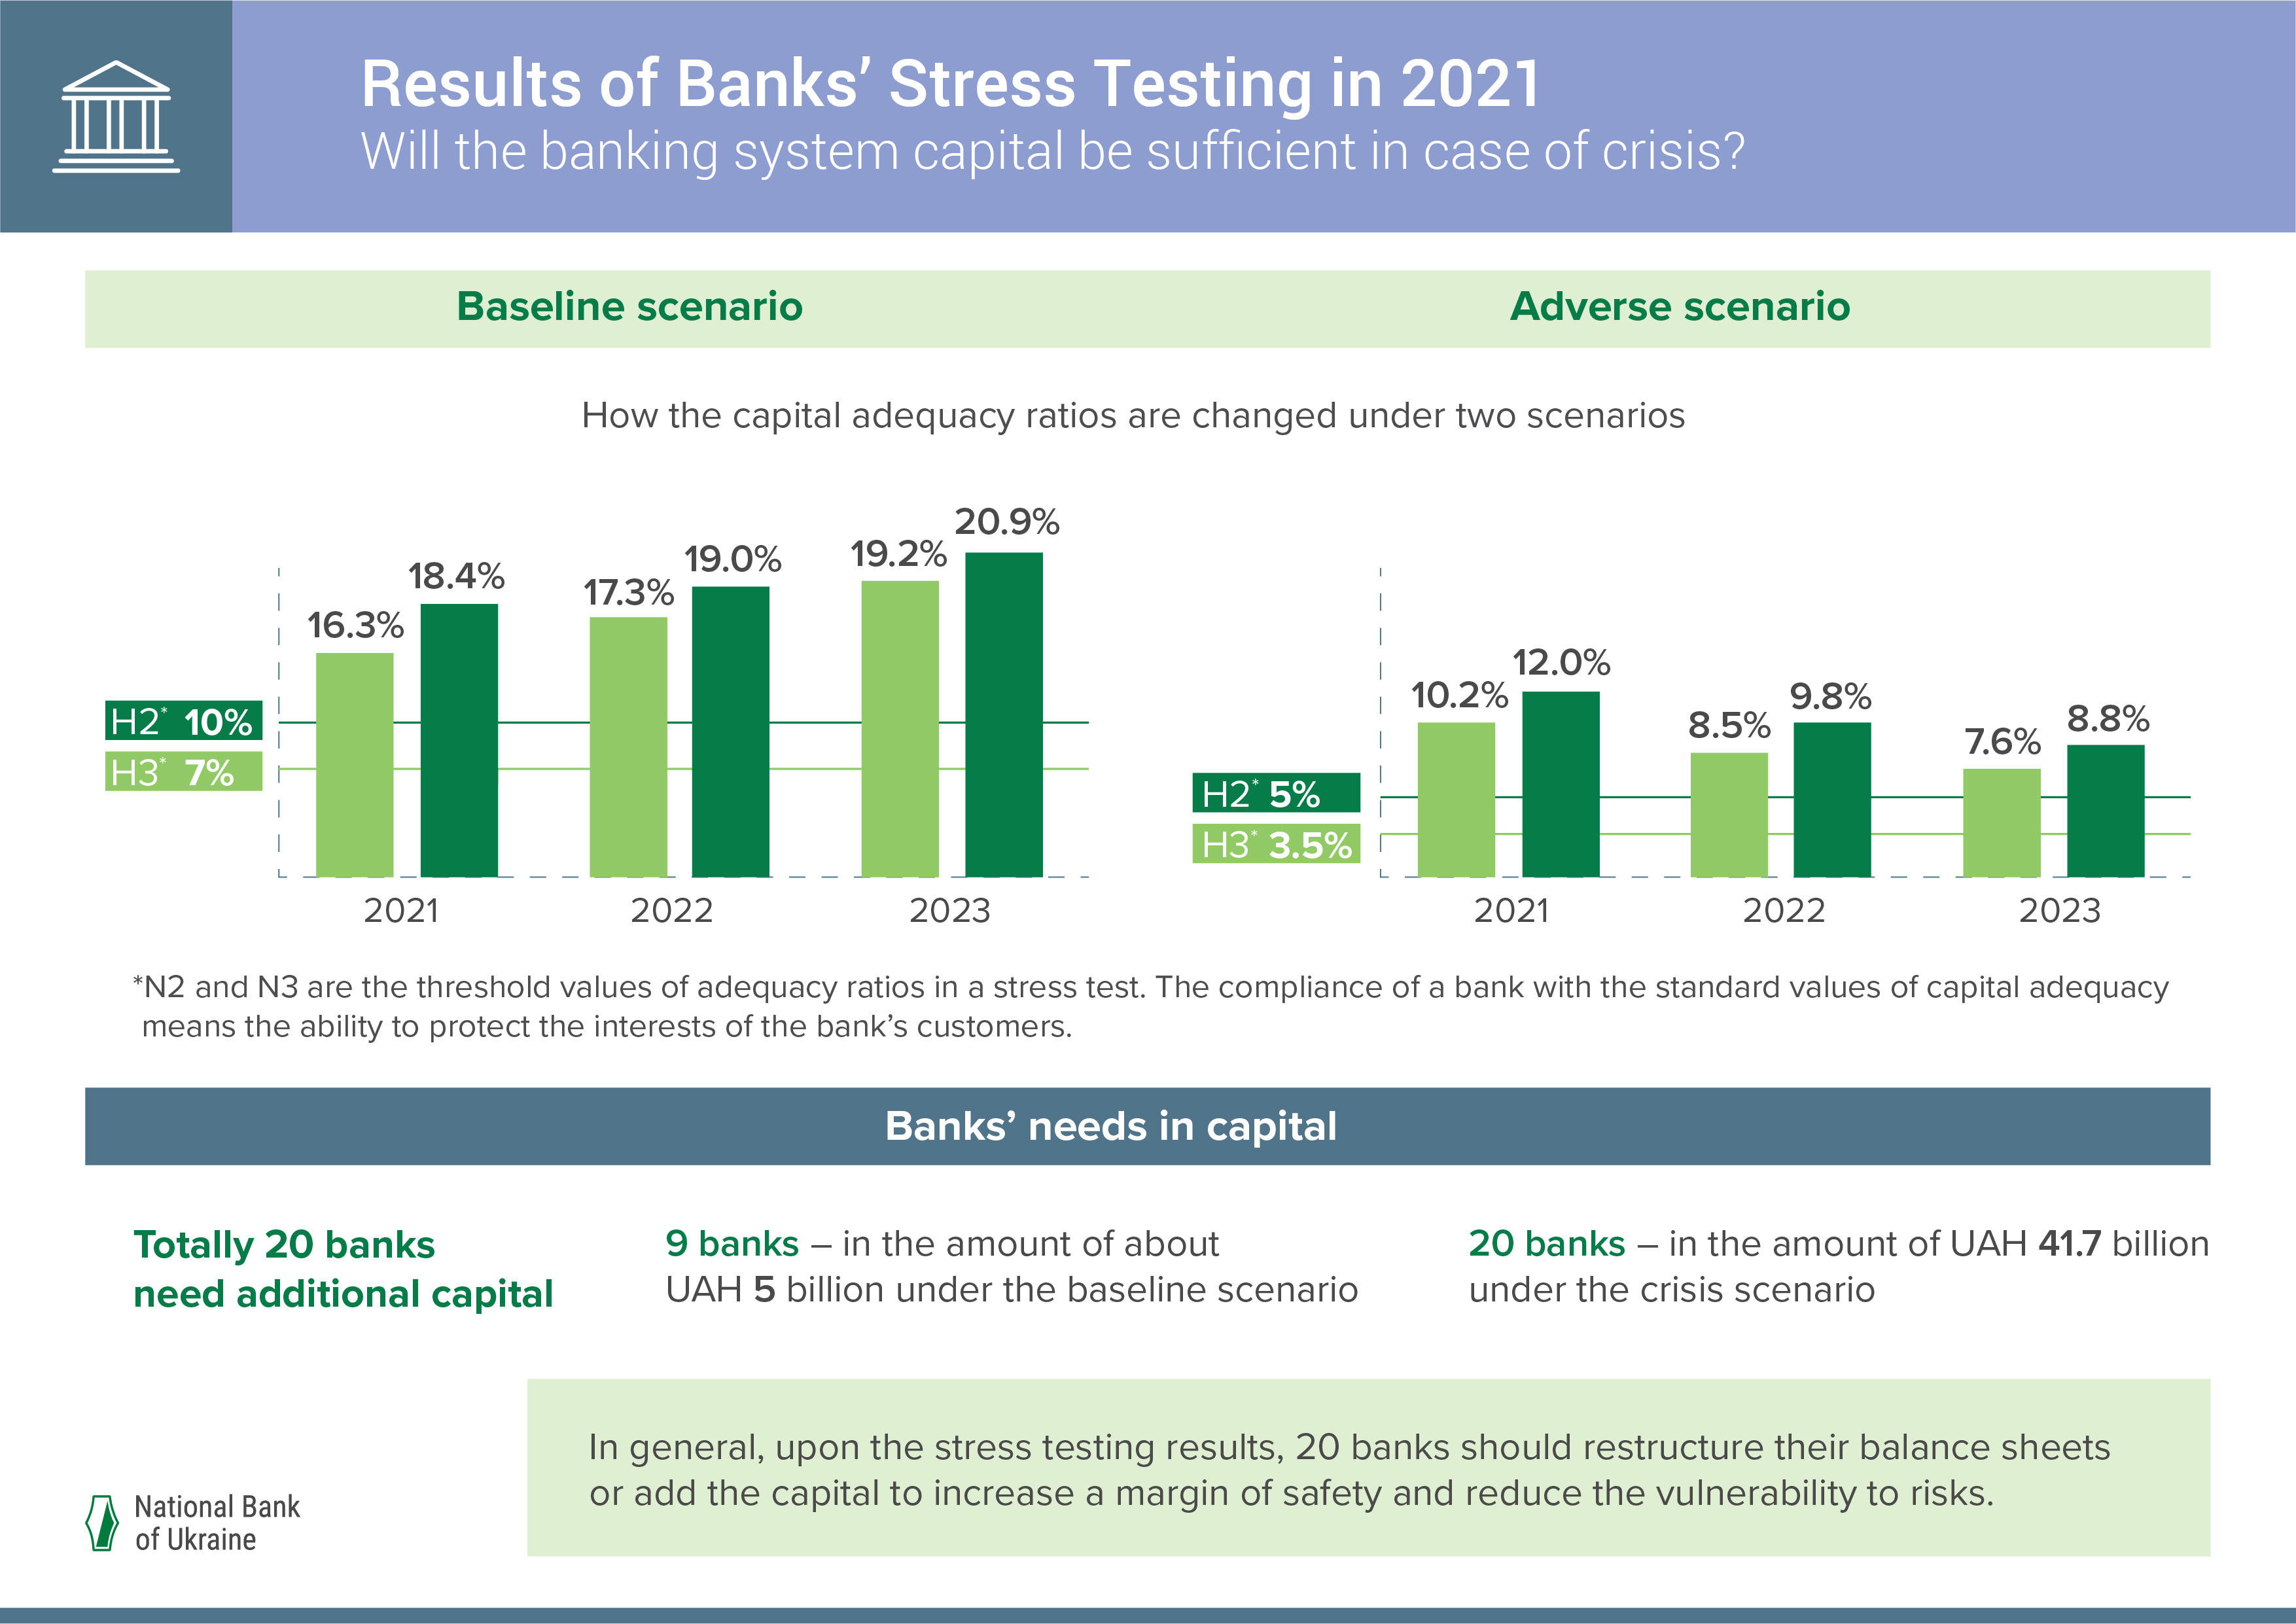 Results of Banks' Stress Testing in 2021